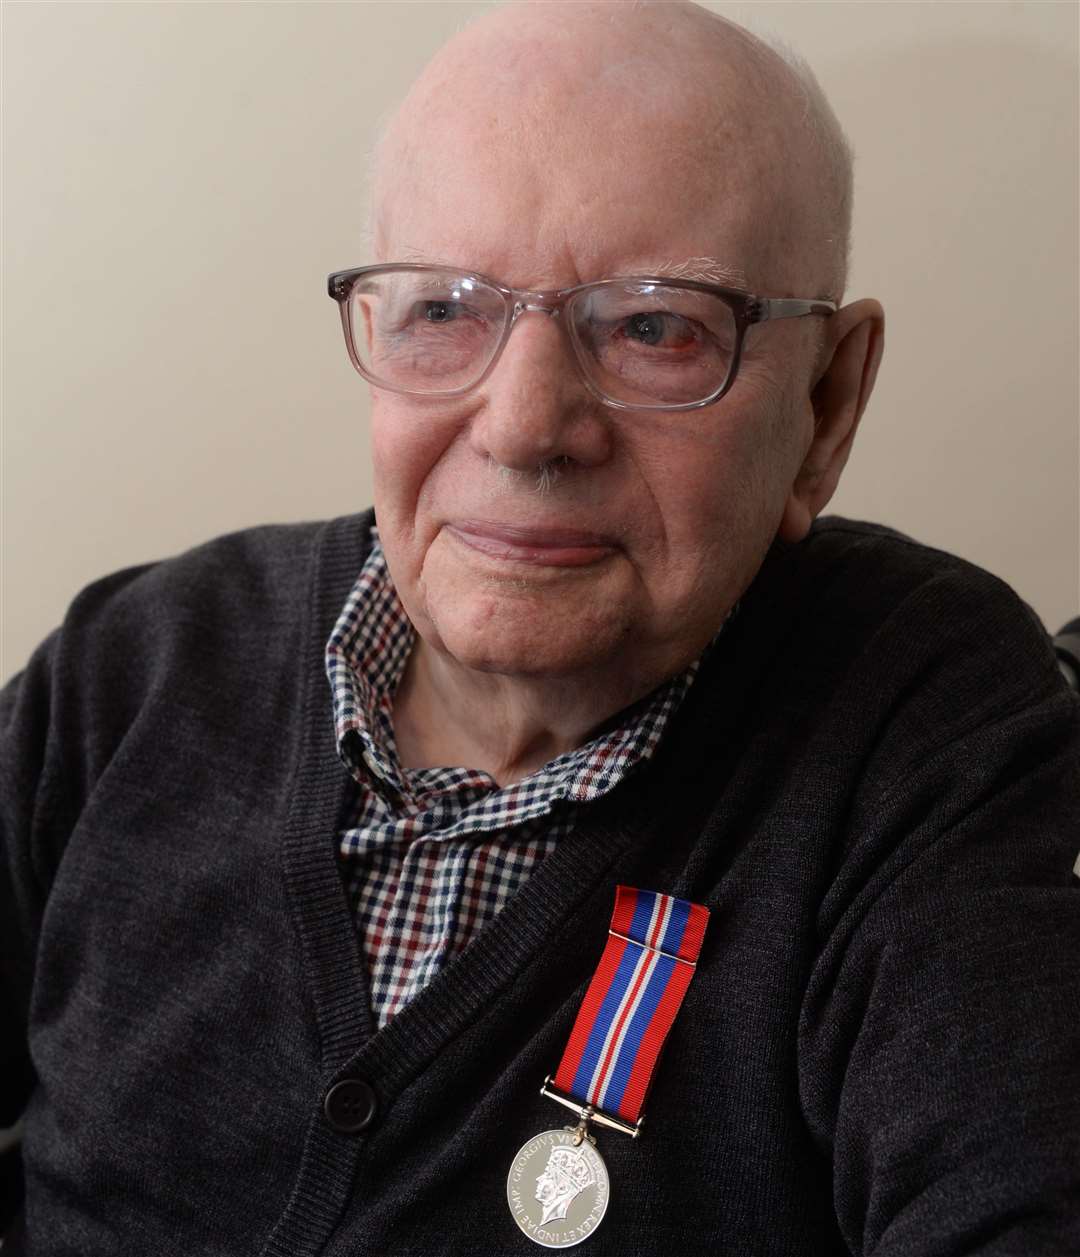 96-year old Albert Gear with his medal